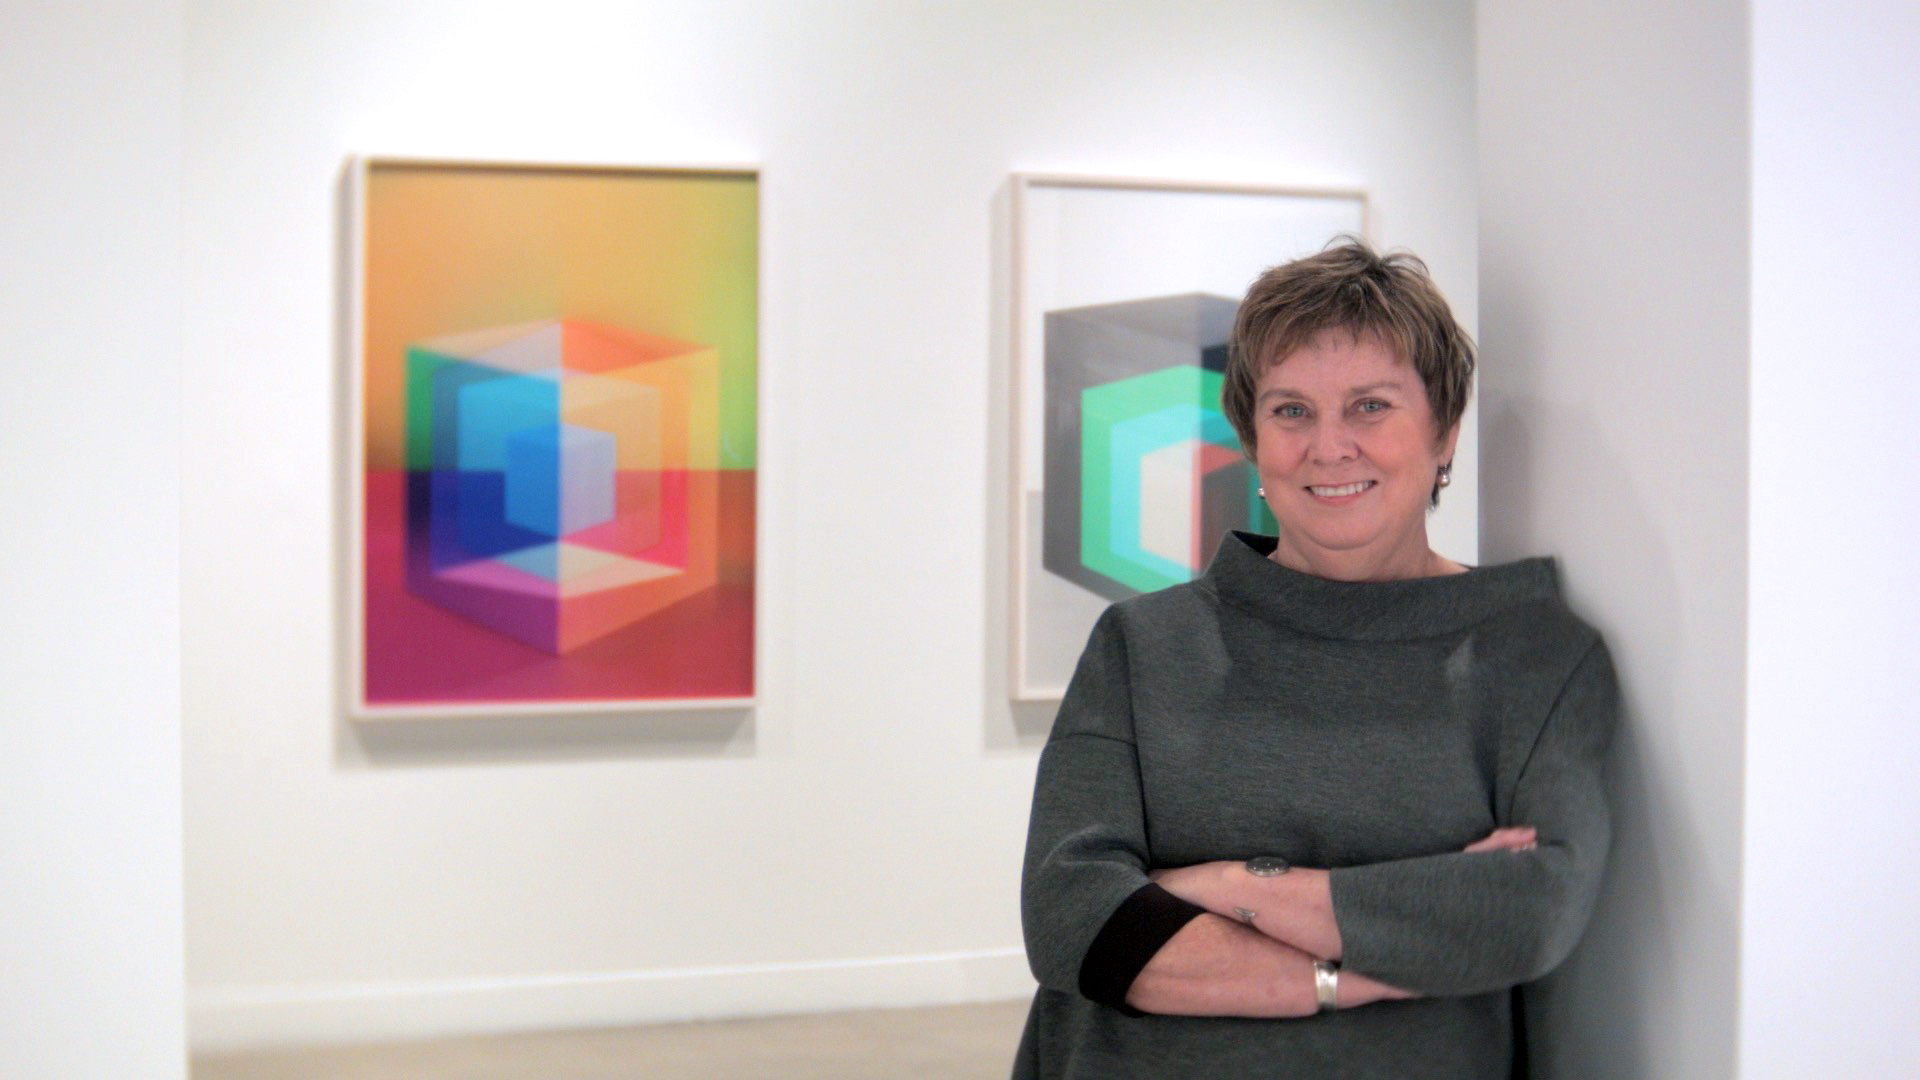 Marnie Fleming with short hair in a sweater in art gallery | Daniel McIntyre